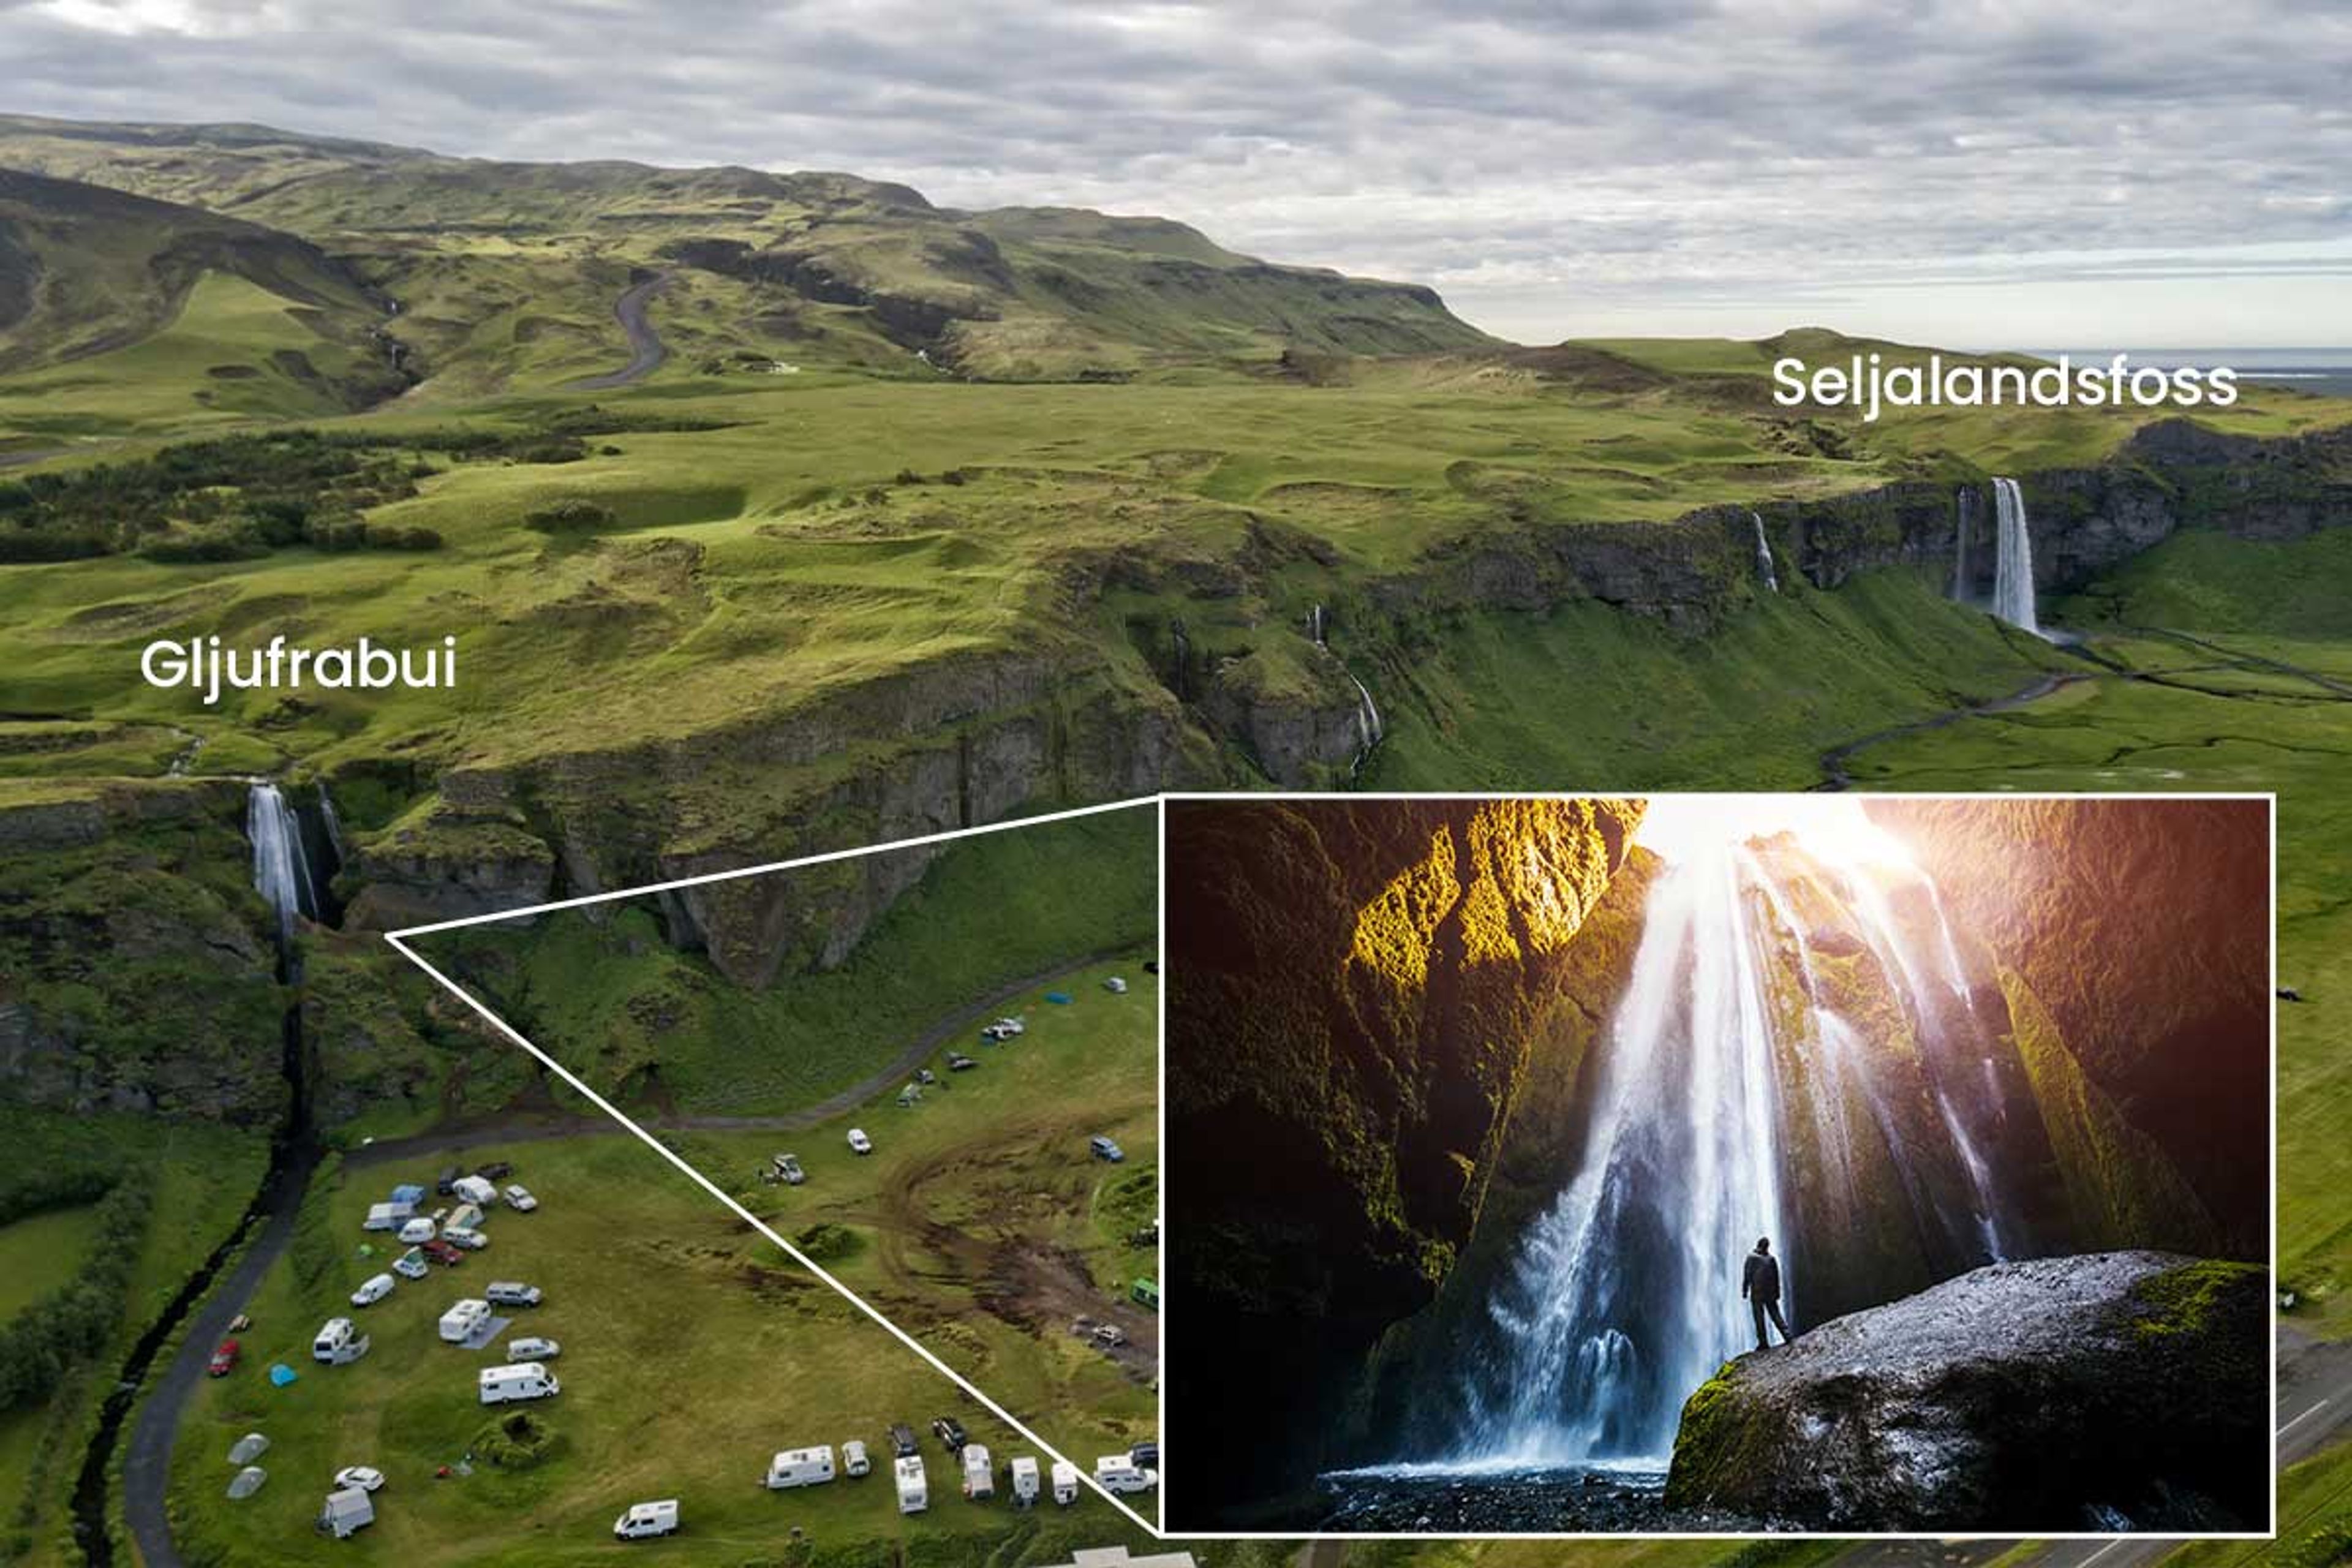 Map showing where gljufrabui is and where seljalandsfoss waterfall is located with rental cars parked around